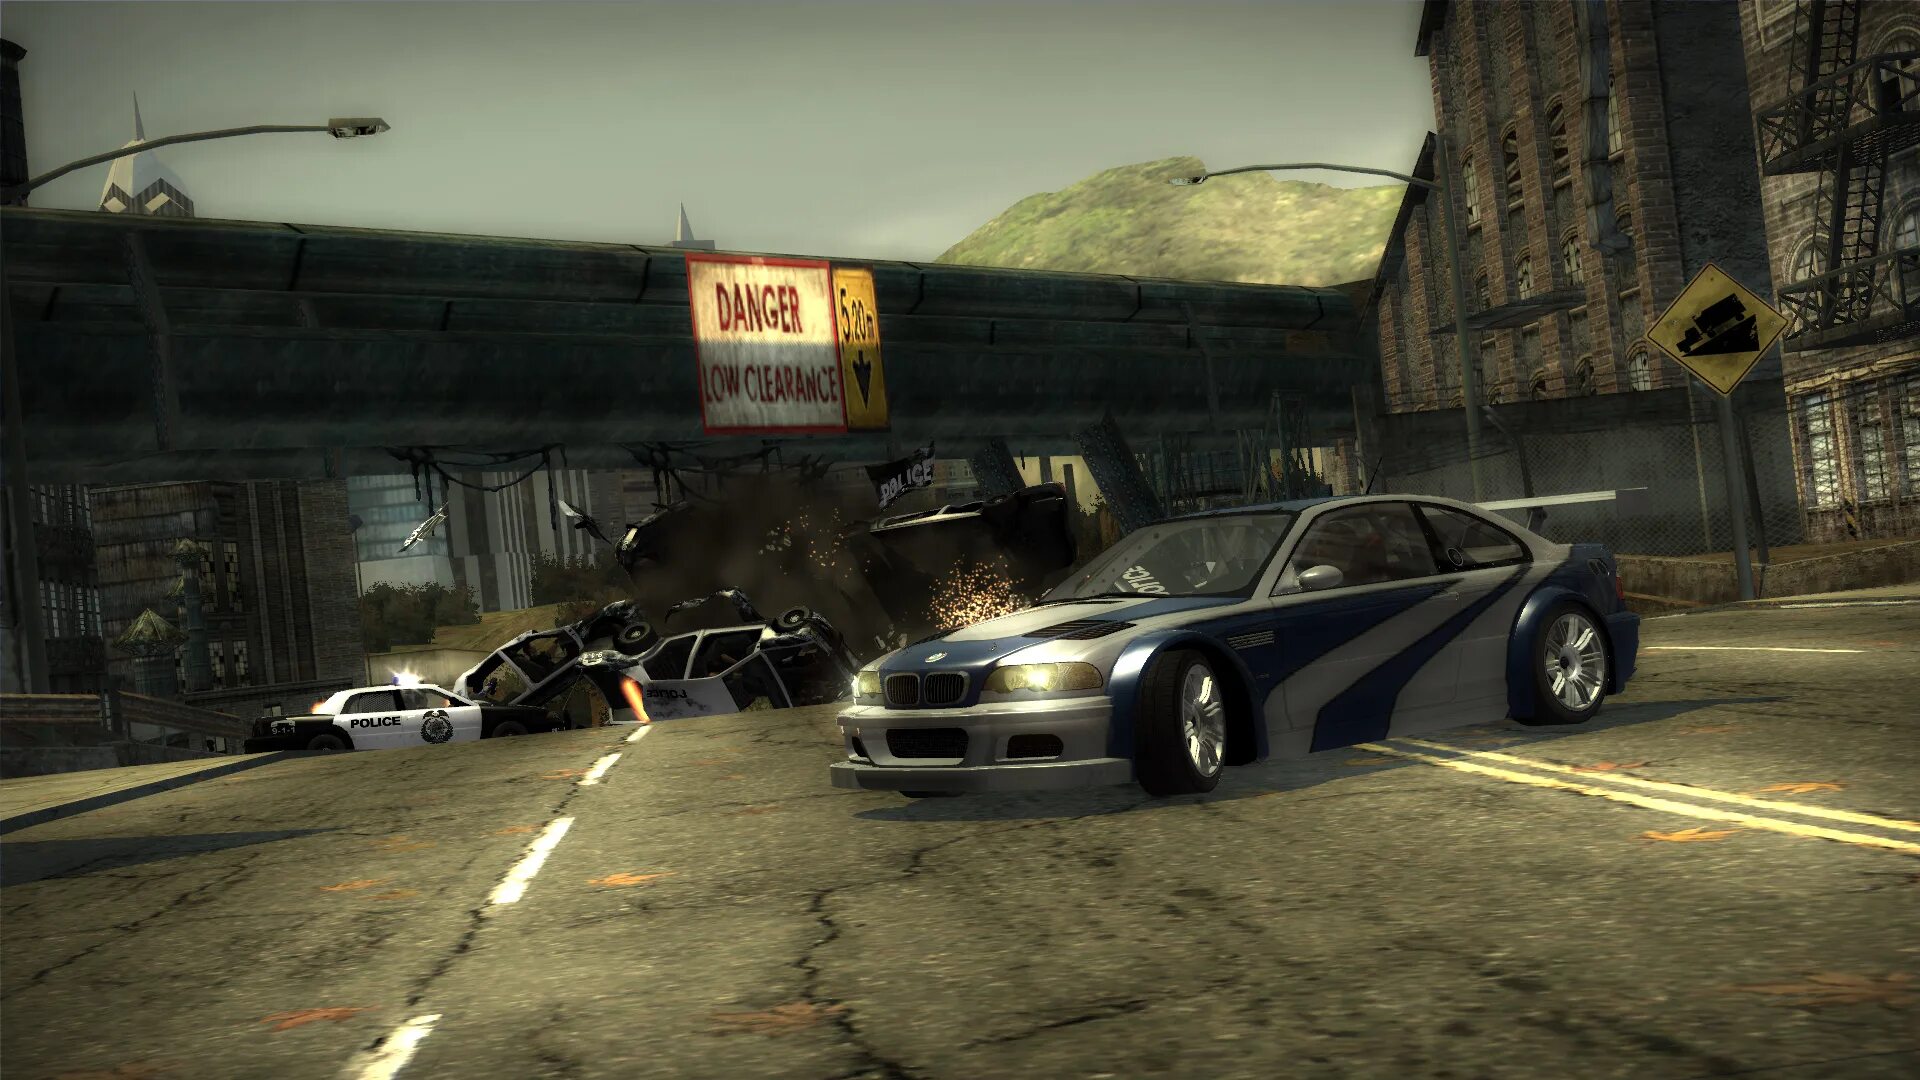 Бета NFS MW 2005. Гонки NFS most wanted 2005. NFS MW 2005 ps2. Новый NFS most wanted 2005. Wanted demo